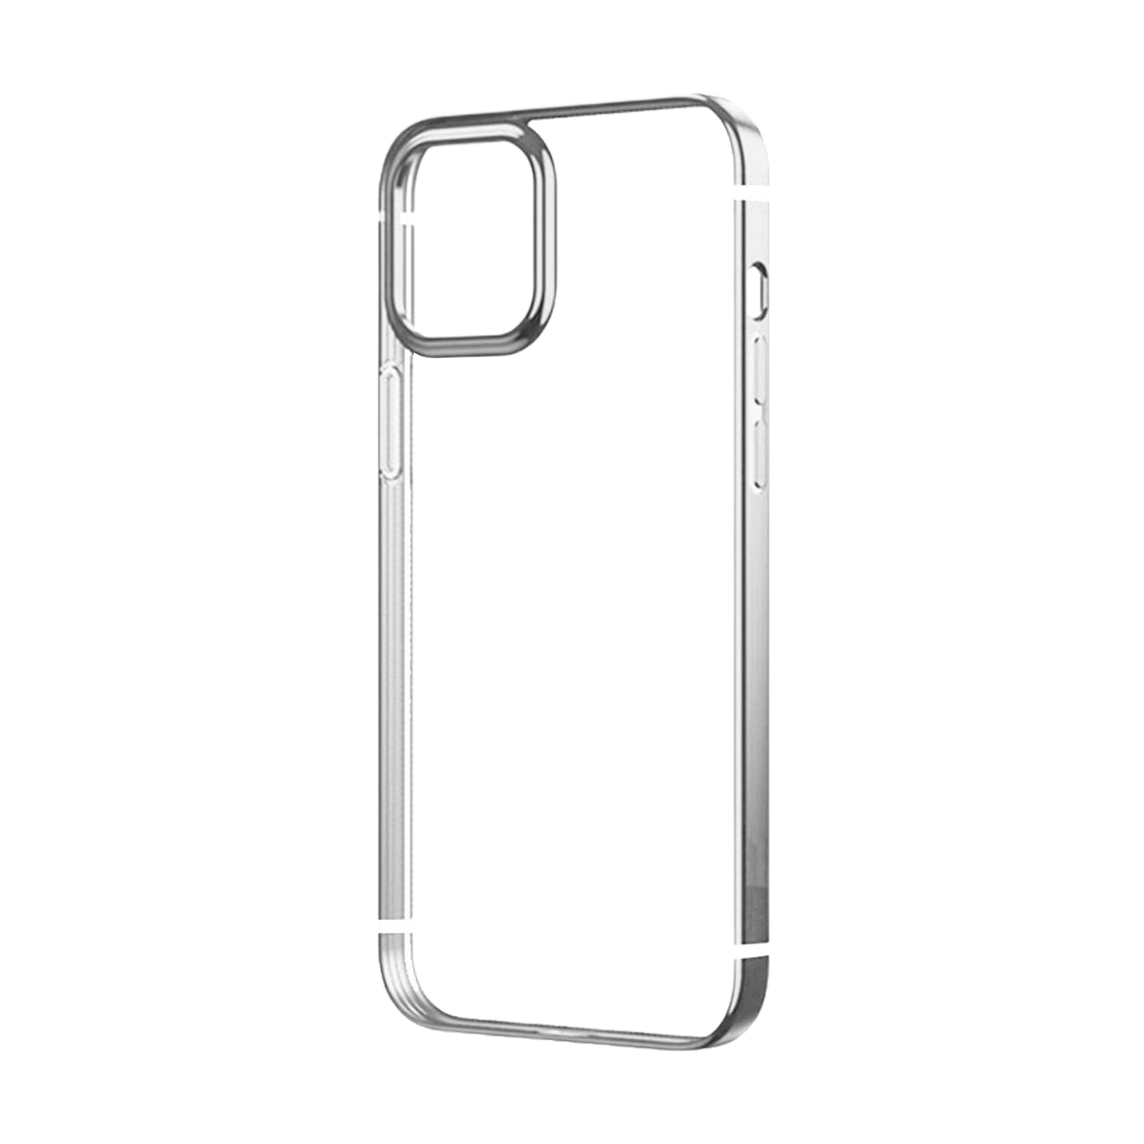 Mutural Case for iPhone 12 Pro Max